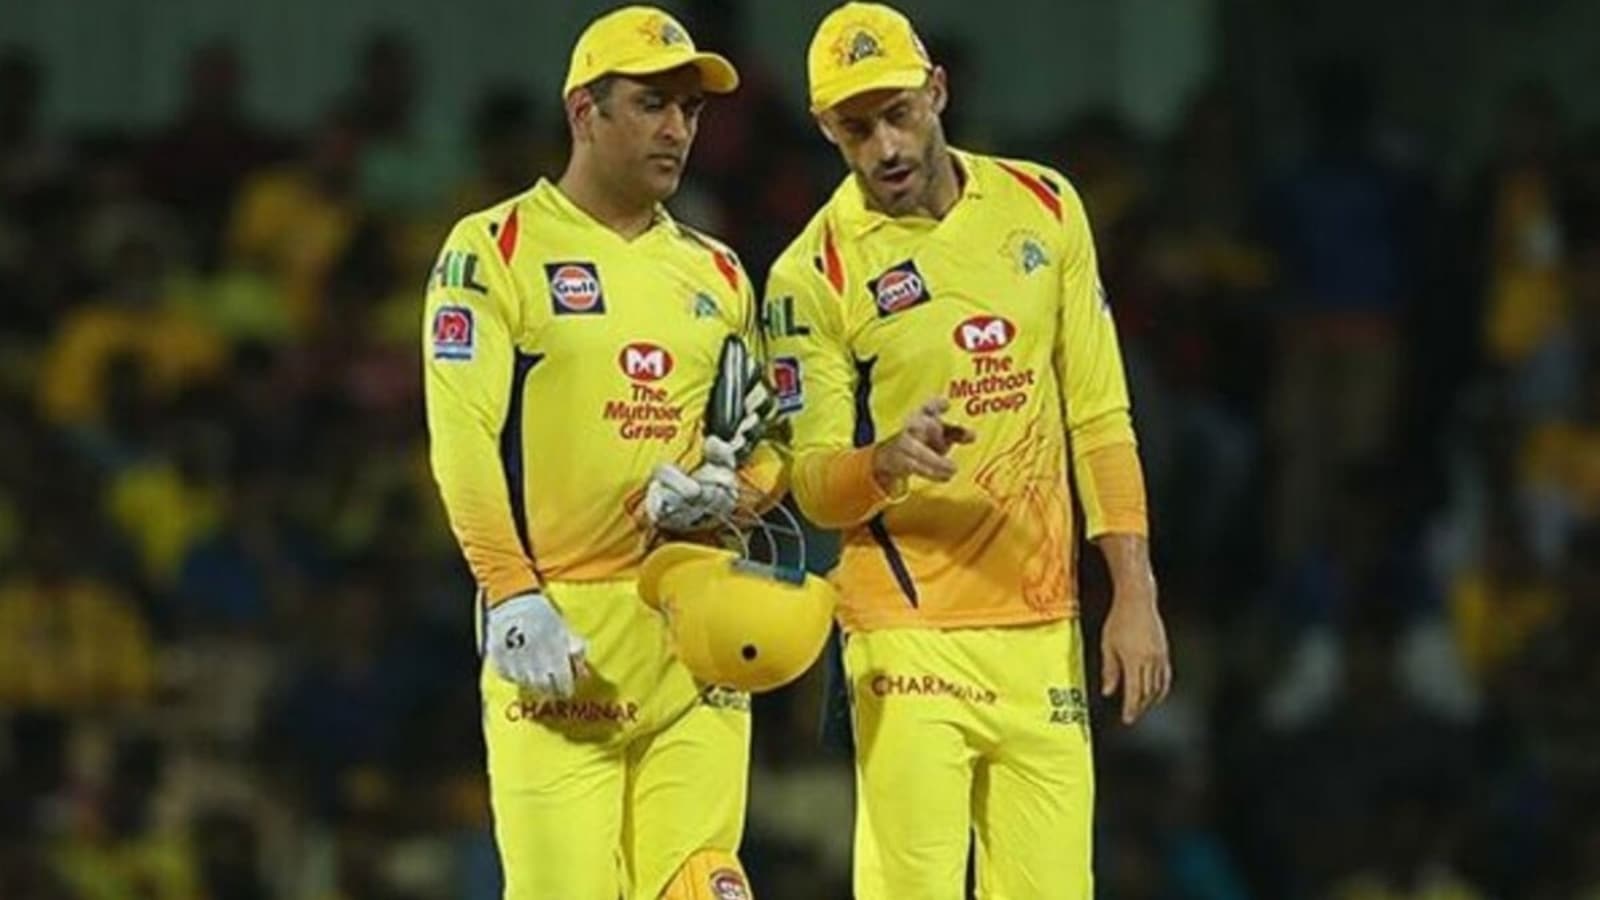 Their talks go on for even 2 hours sometimes': CSK youngster throws light on the bond between MS Dhoni, Faf du Plessis | Cricket - Hindustan Times